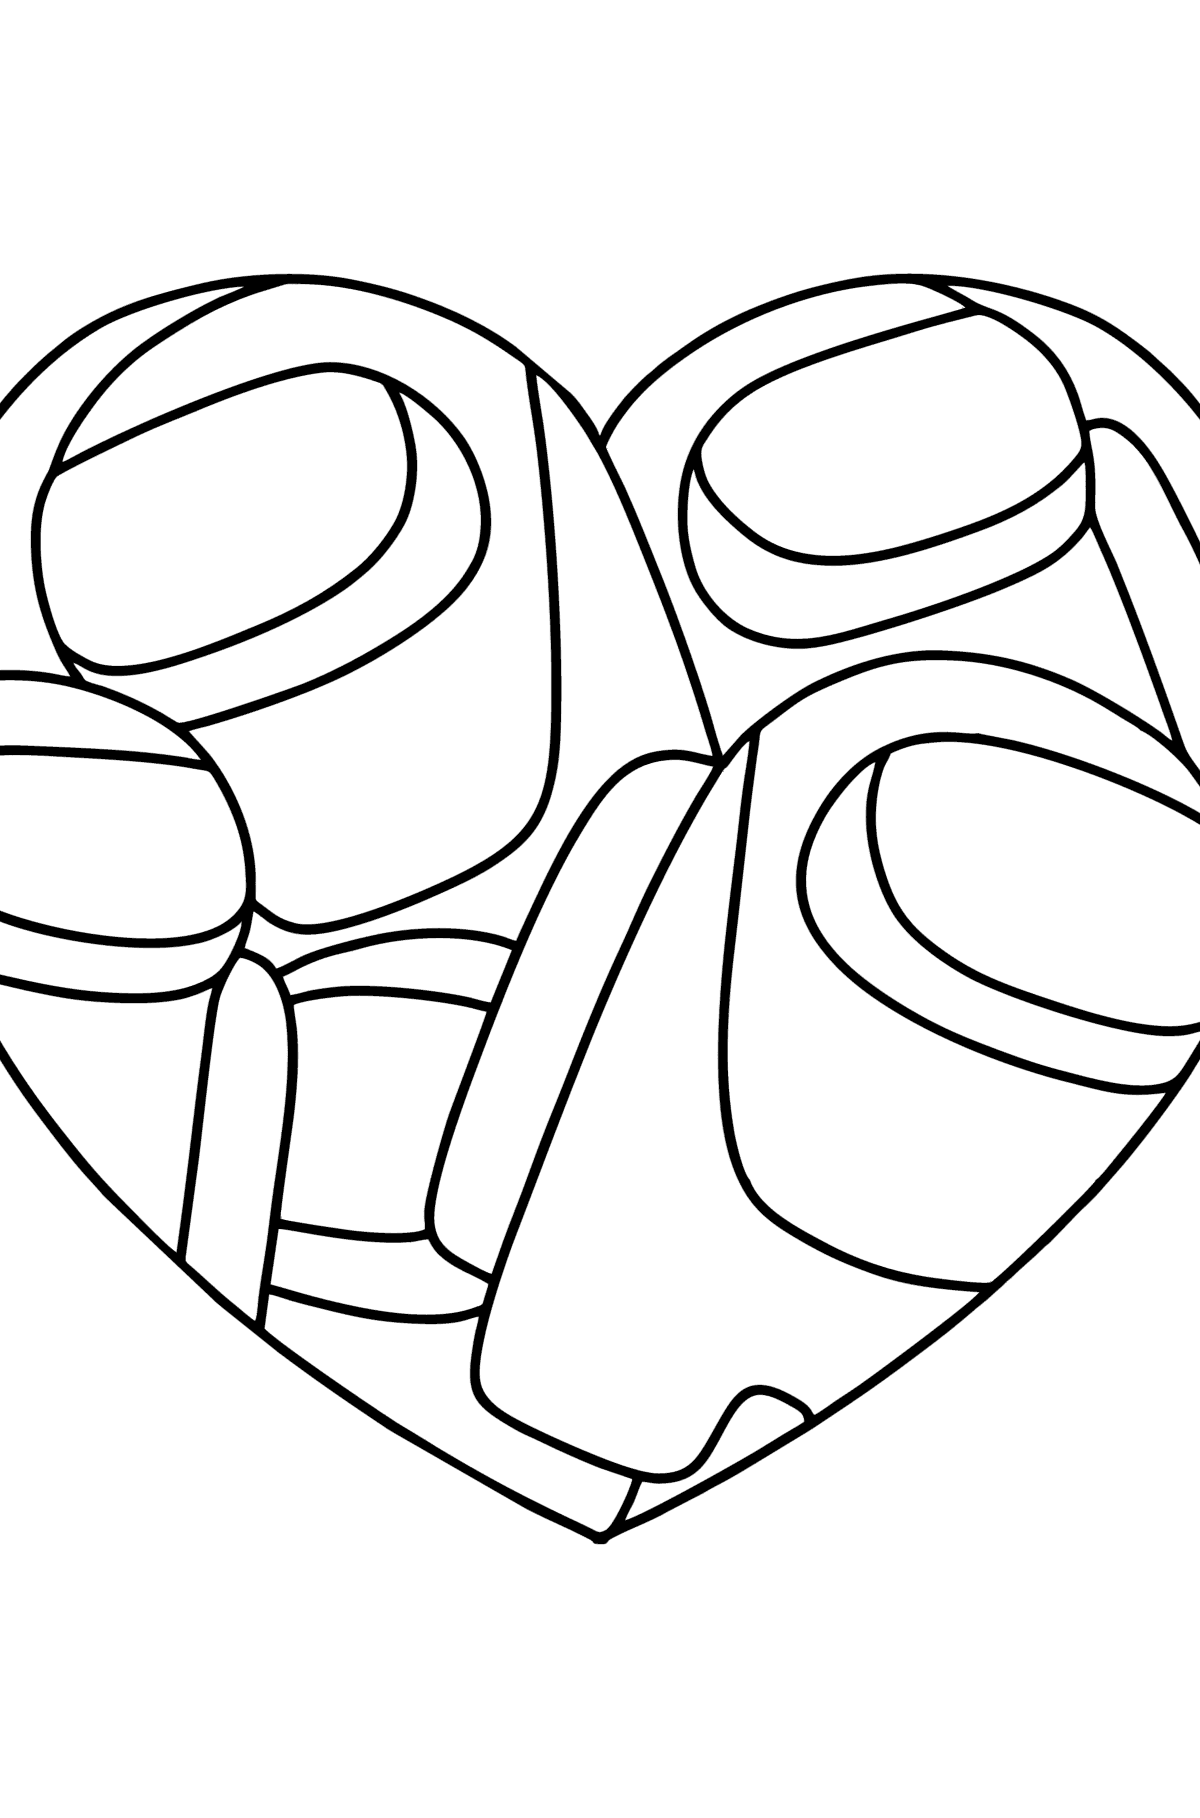 Coloring page heart with the heroes of Among Us - Coloring Pages for Kids